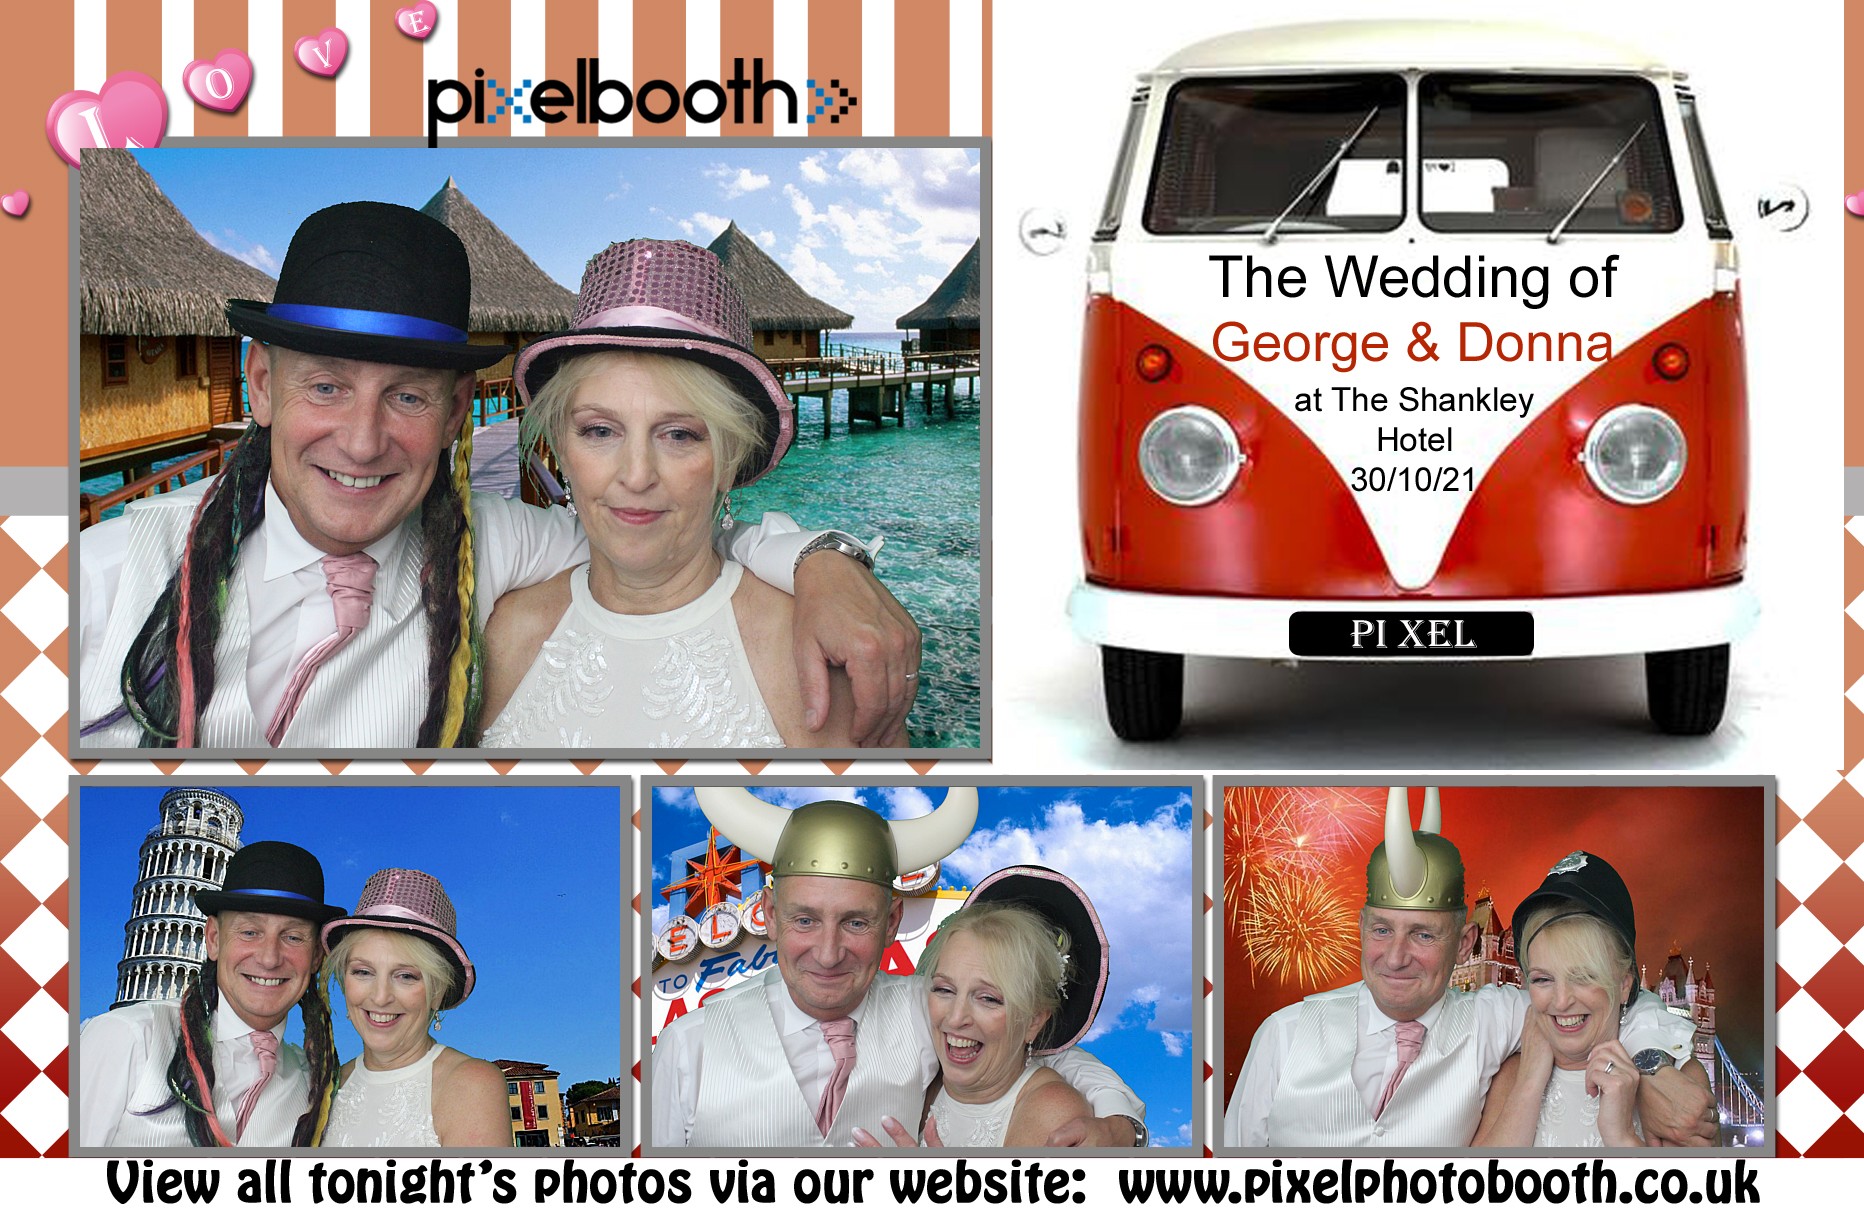 30th Oct 2021: George and Donna's Wedding at The Shankley Hotel